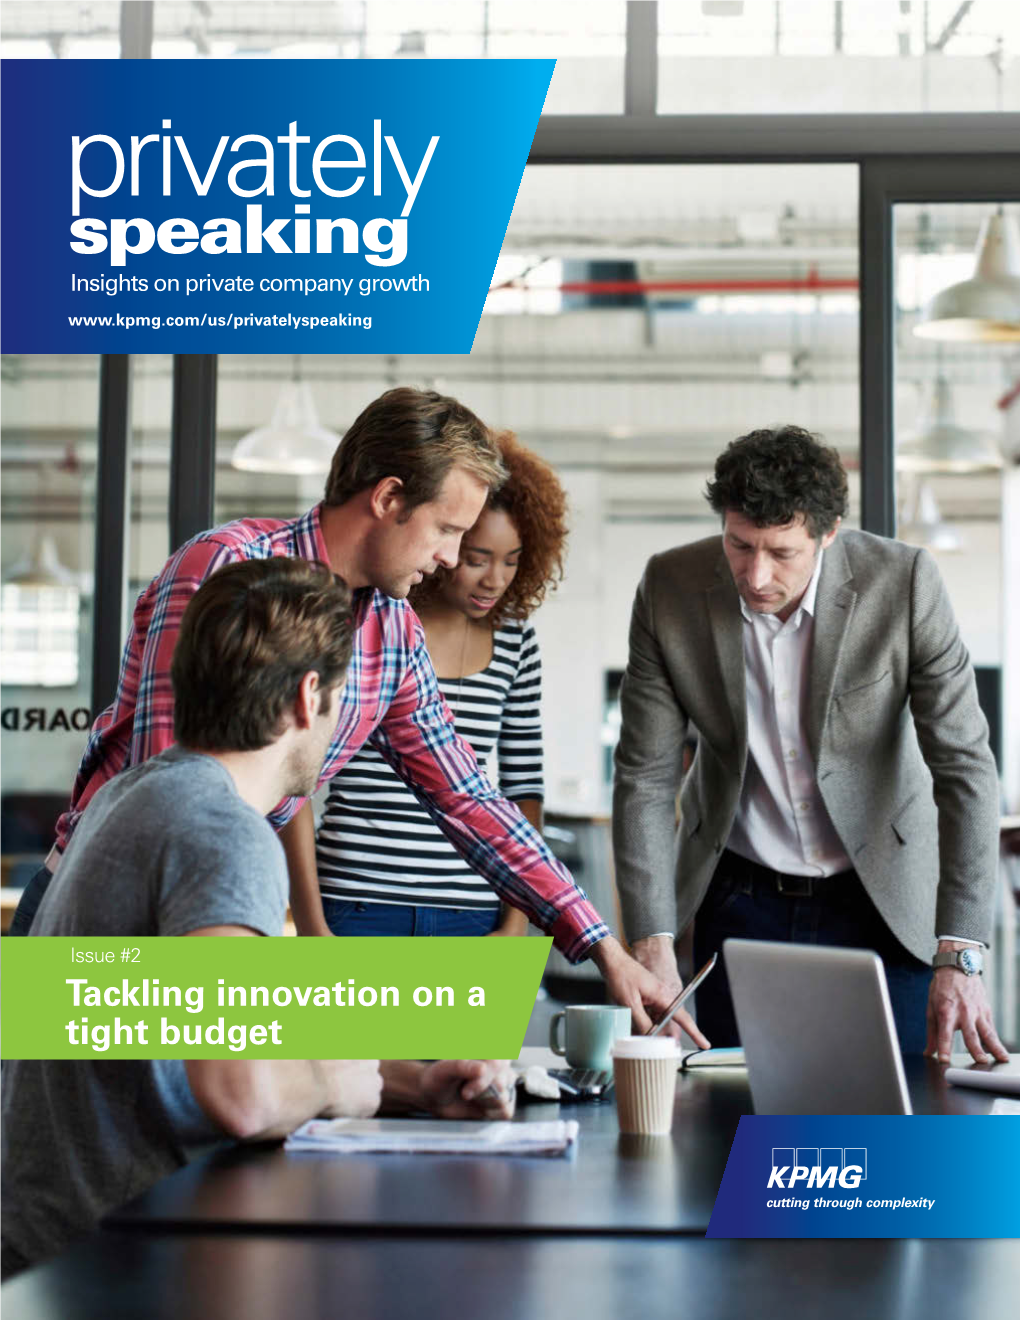 Privately Speaking Issue #2: Tackling Innovation on a Tight